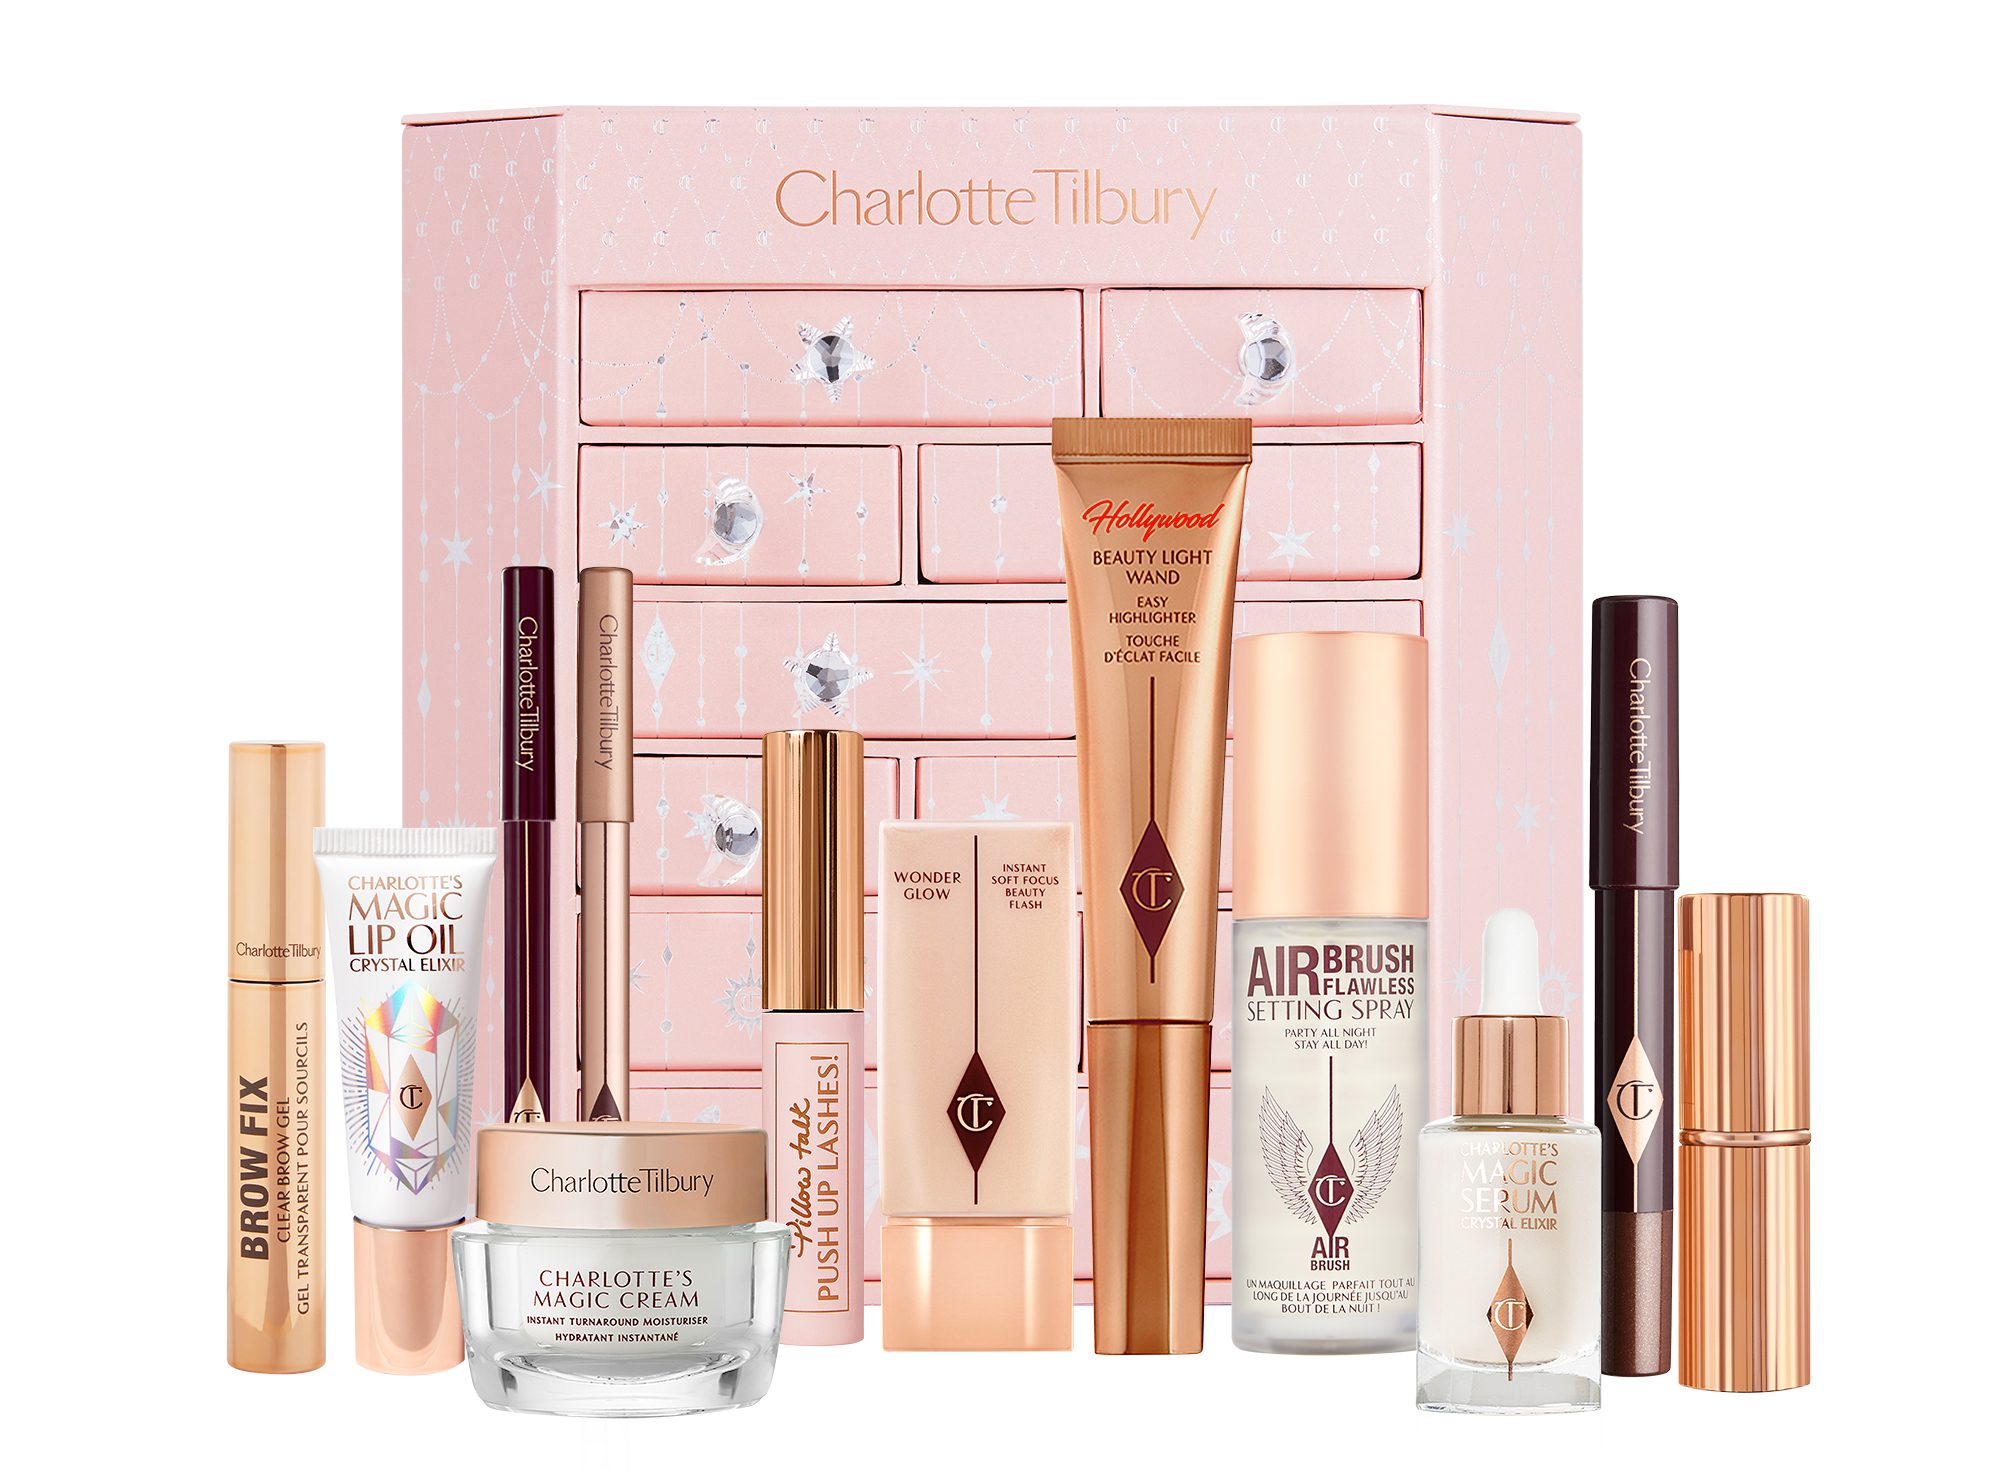 Charlotte Tilbury's Diamond Chest of Beauty Stars advent calendar with all the beauty products inside on display.